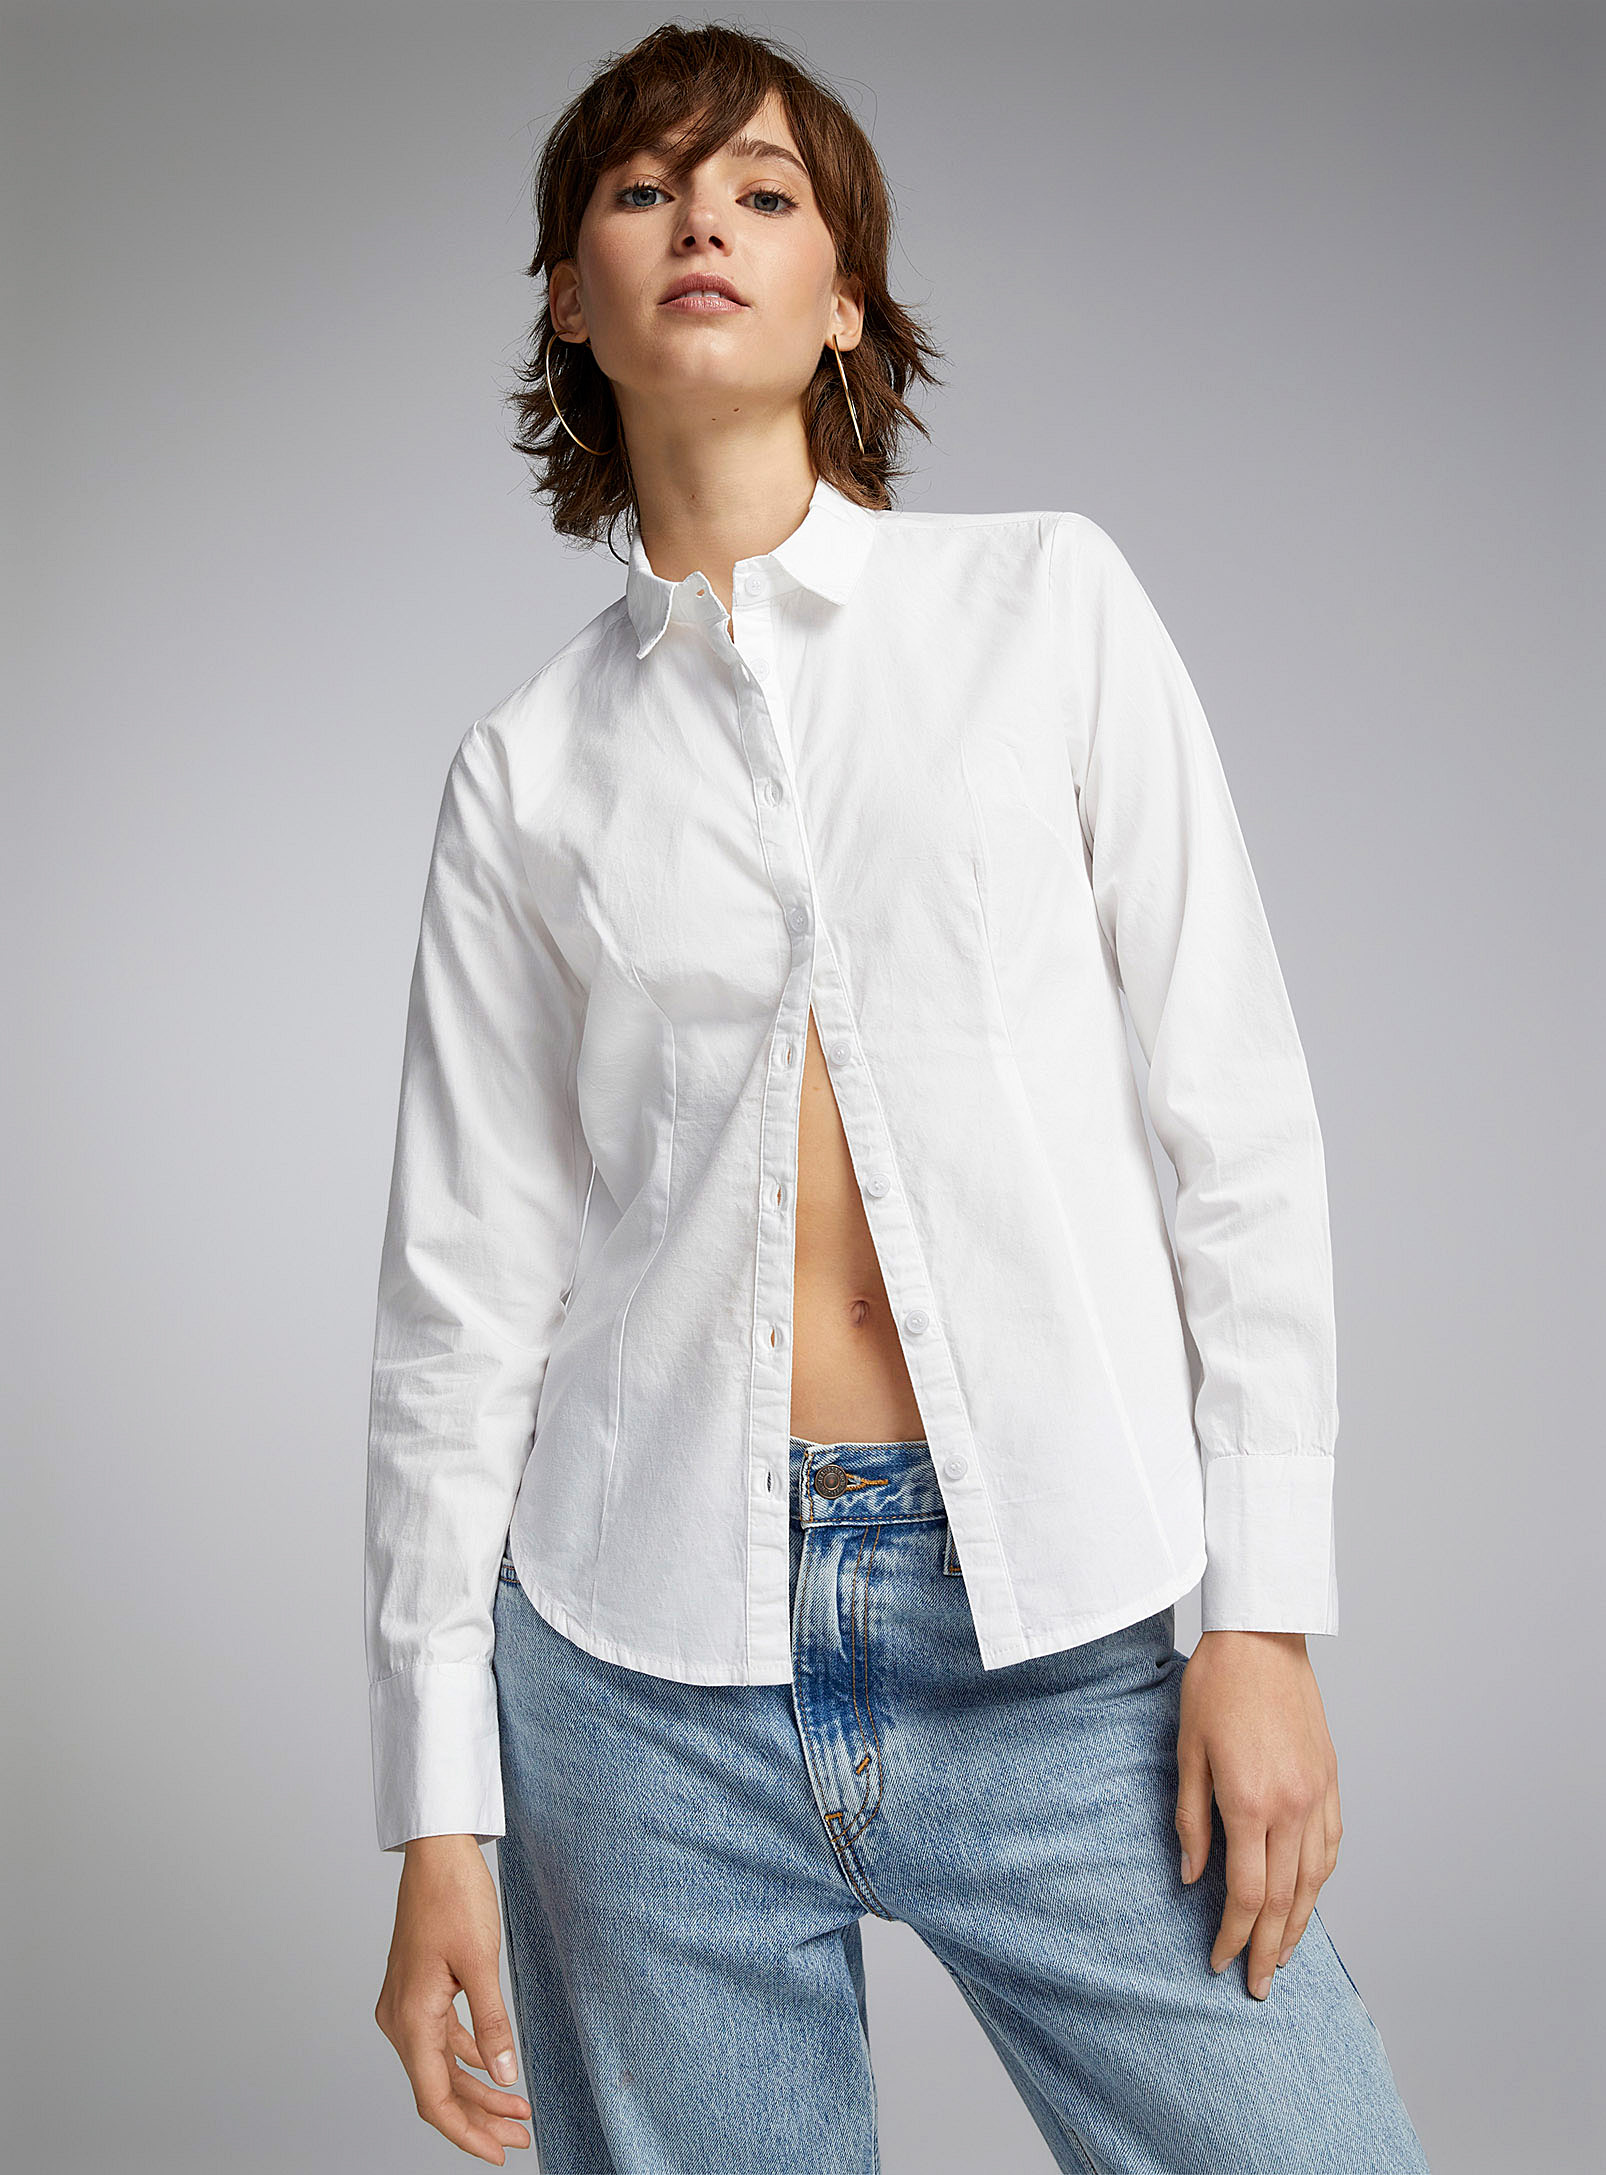 Twik - Women's Pure cotton fitted shirt